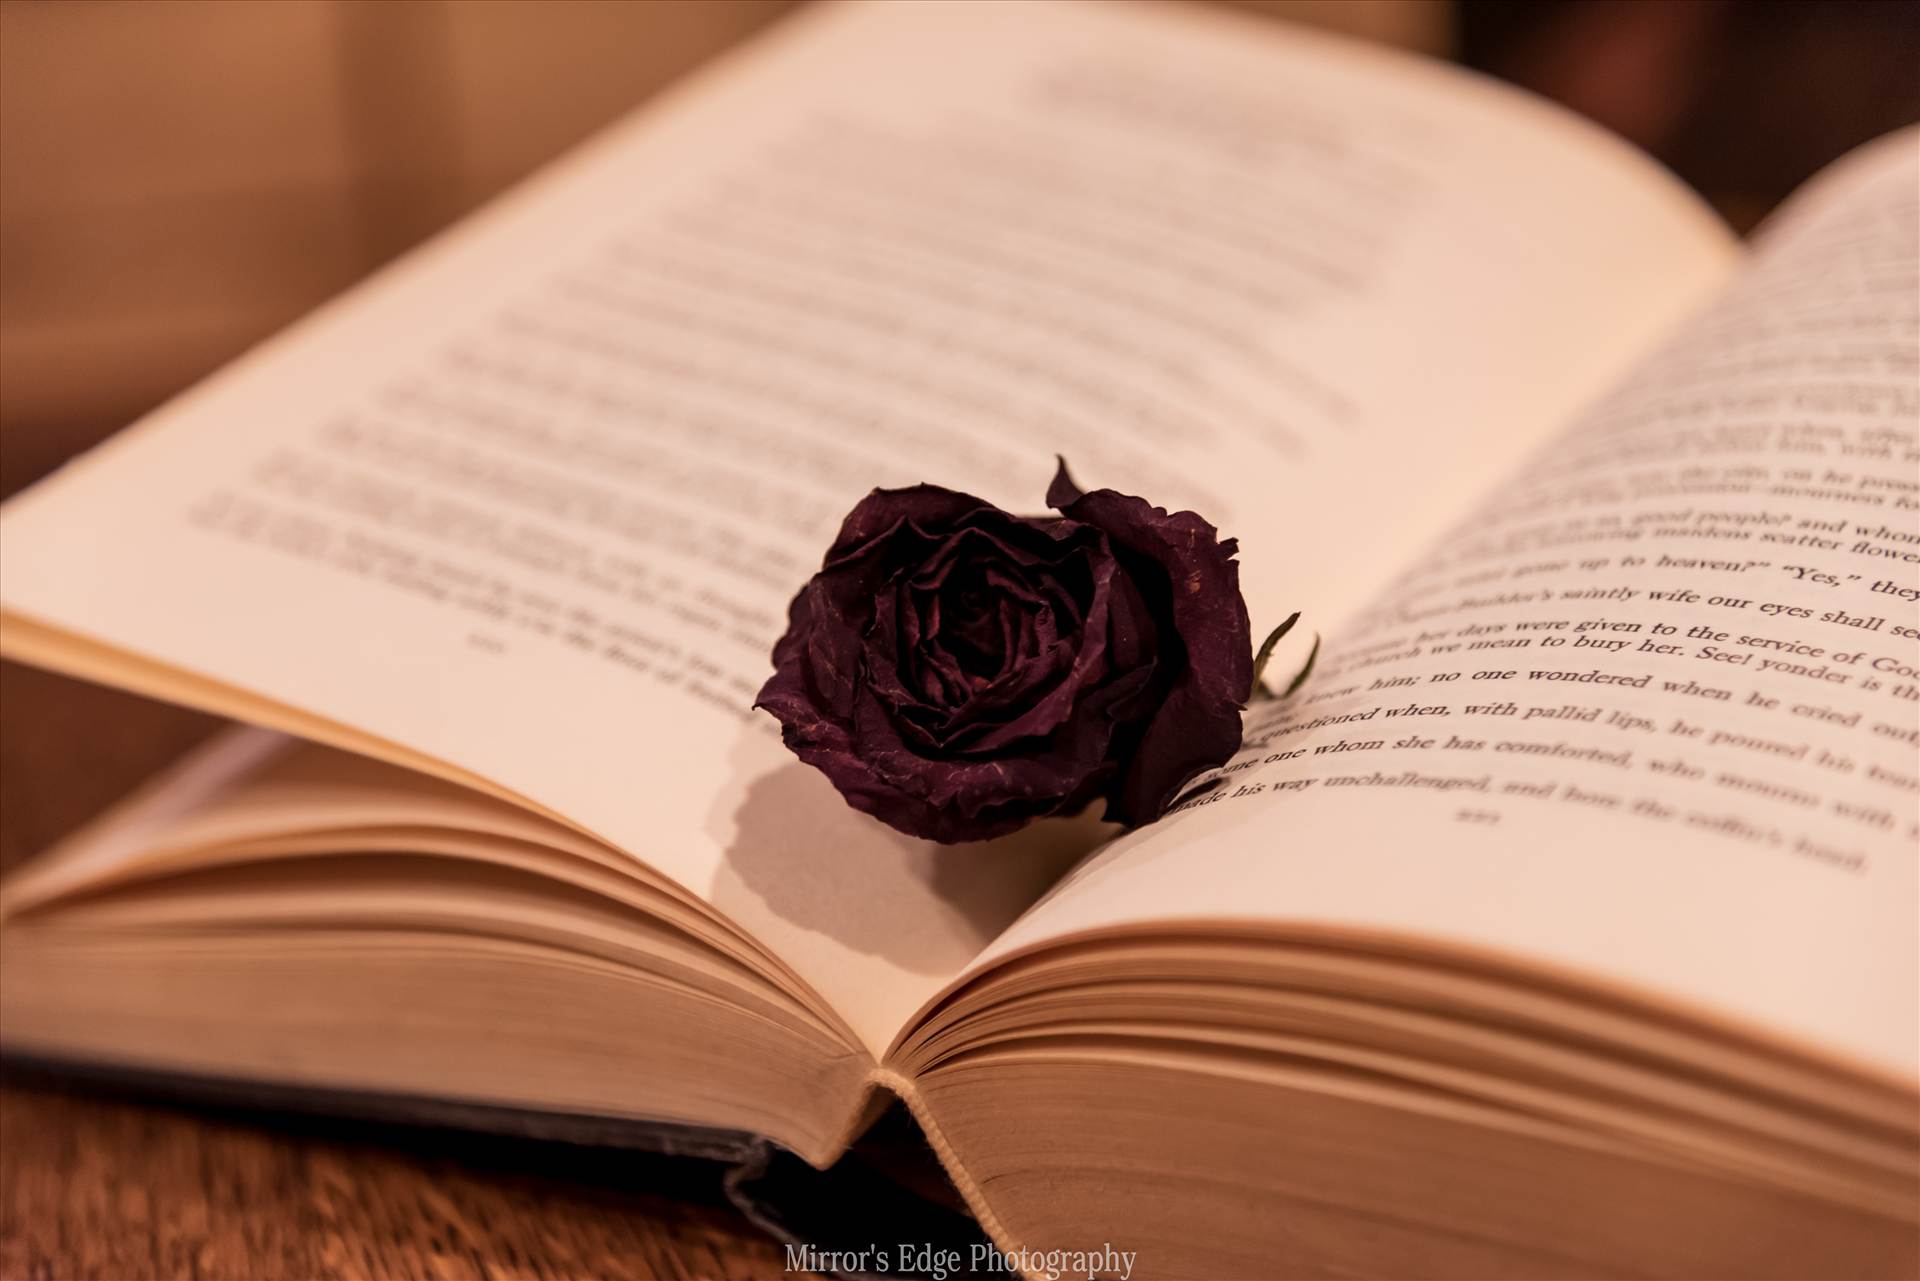 Black Rose in a Book.jpg undefined by Sarah Williams